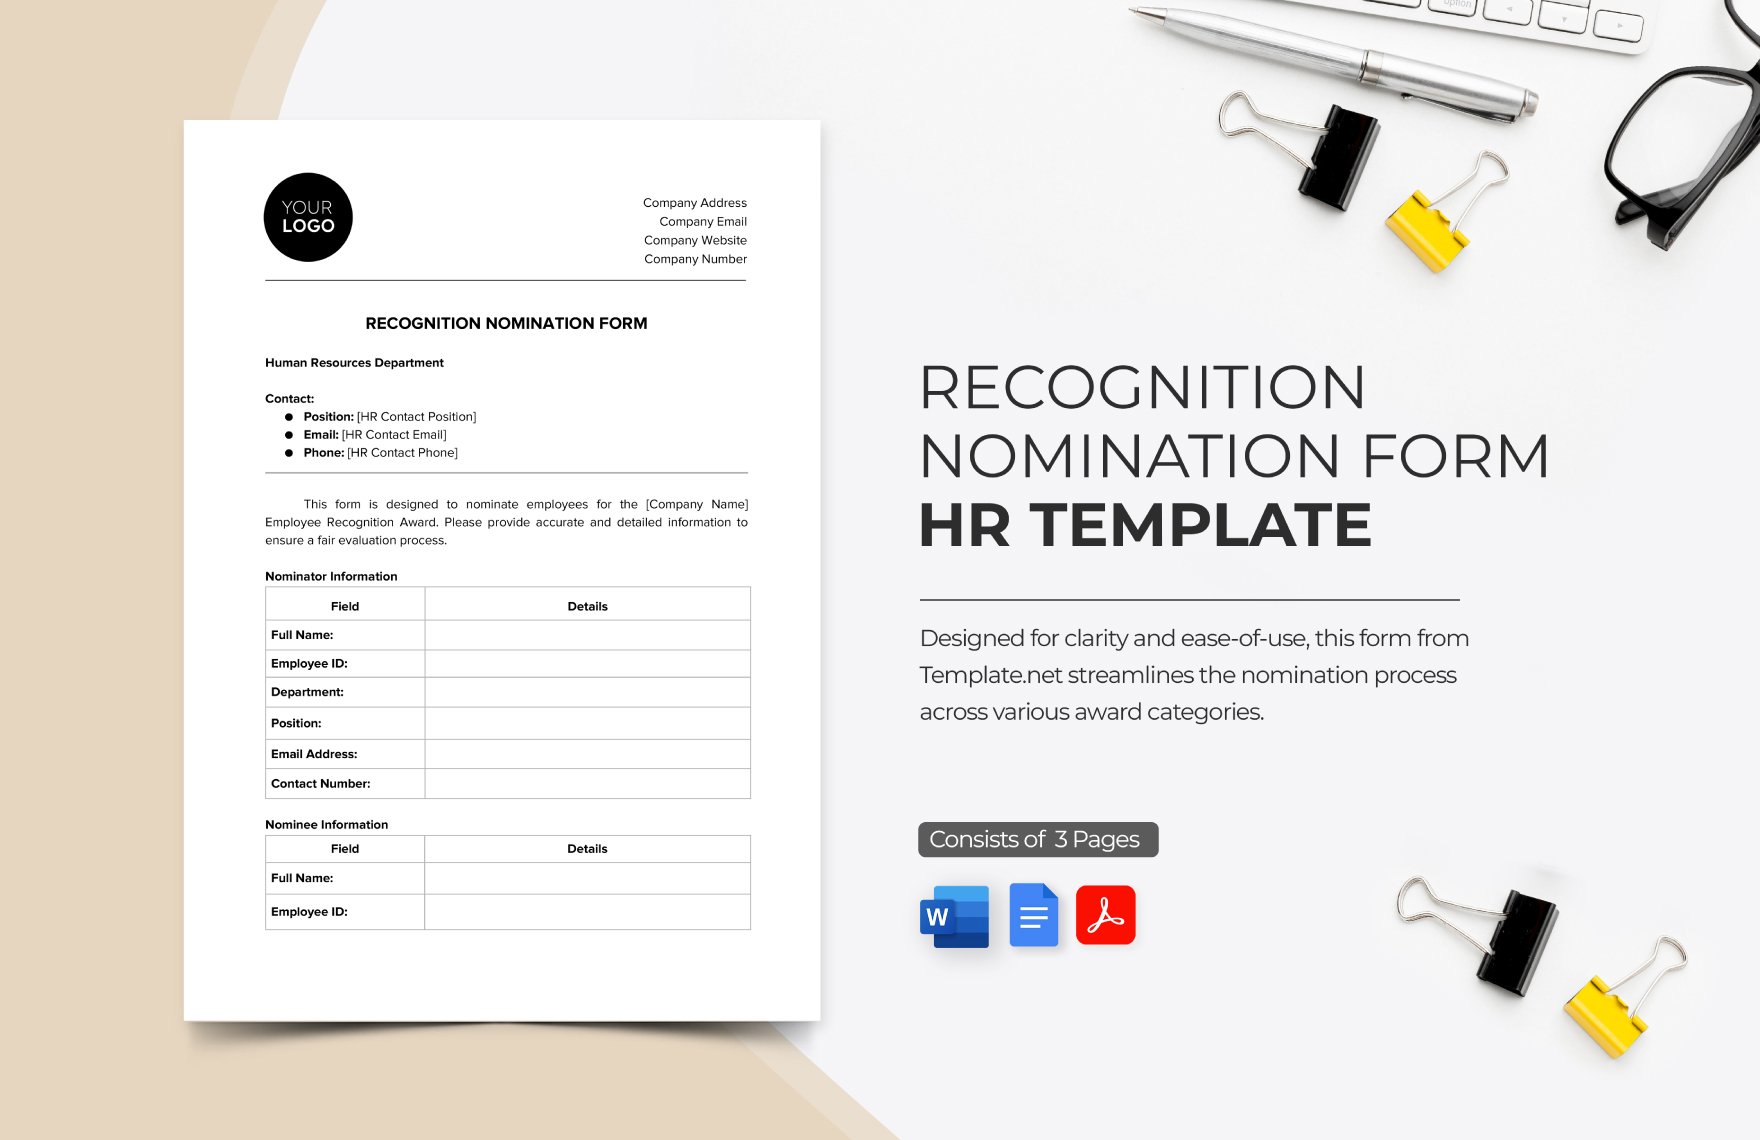 Recognition Nomination Form HR Template in Word, Google Docs, PDF